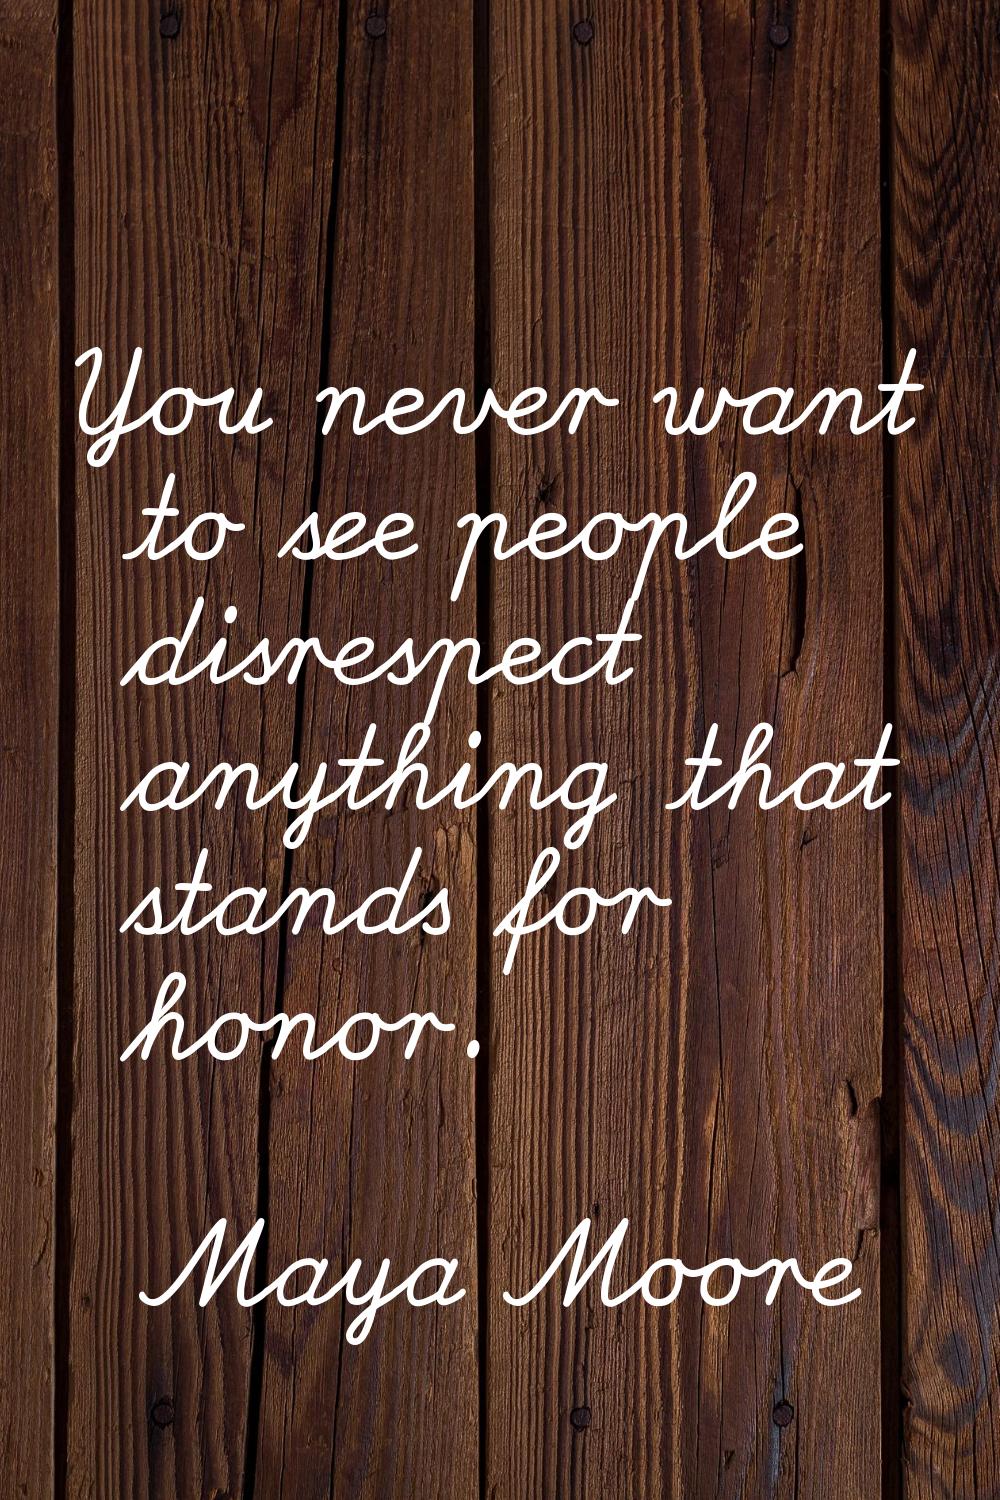 You never want to see people disrespect anything that stands for honor.